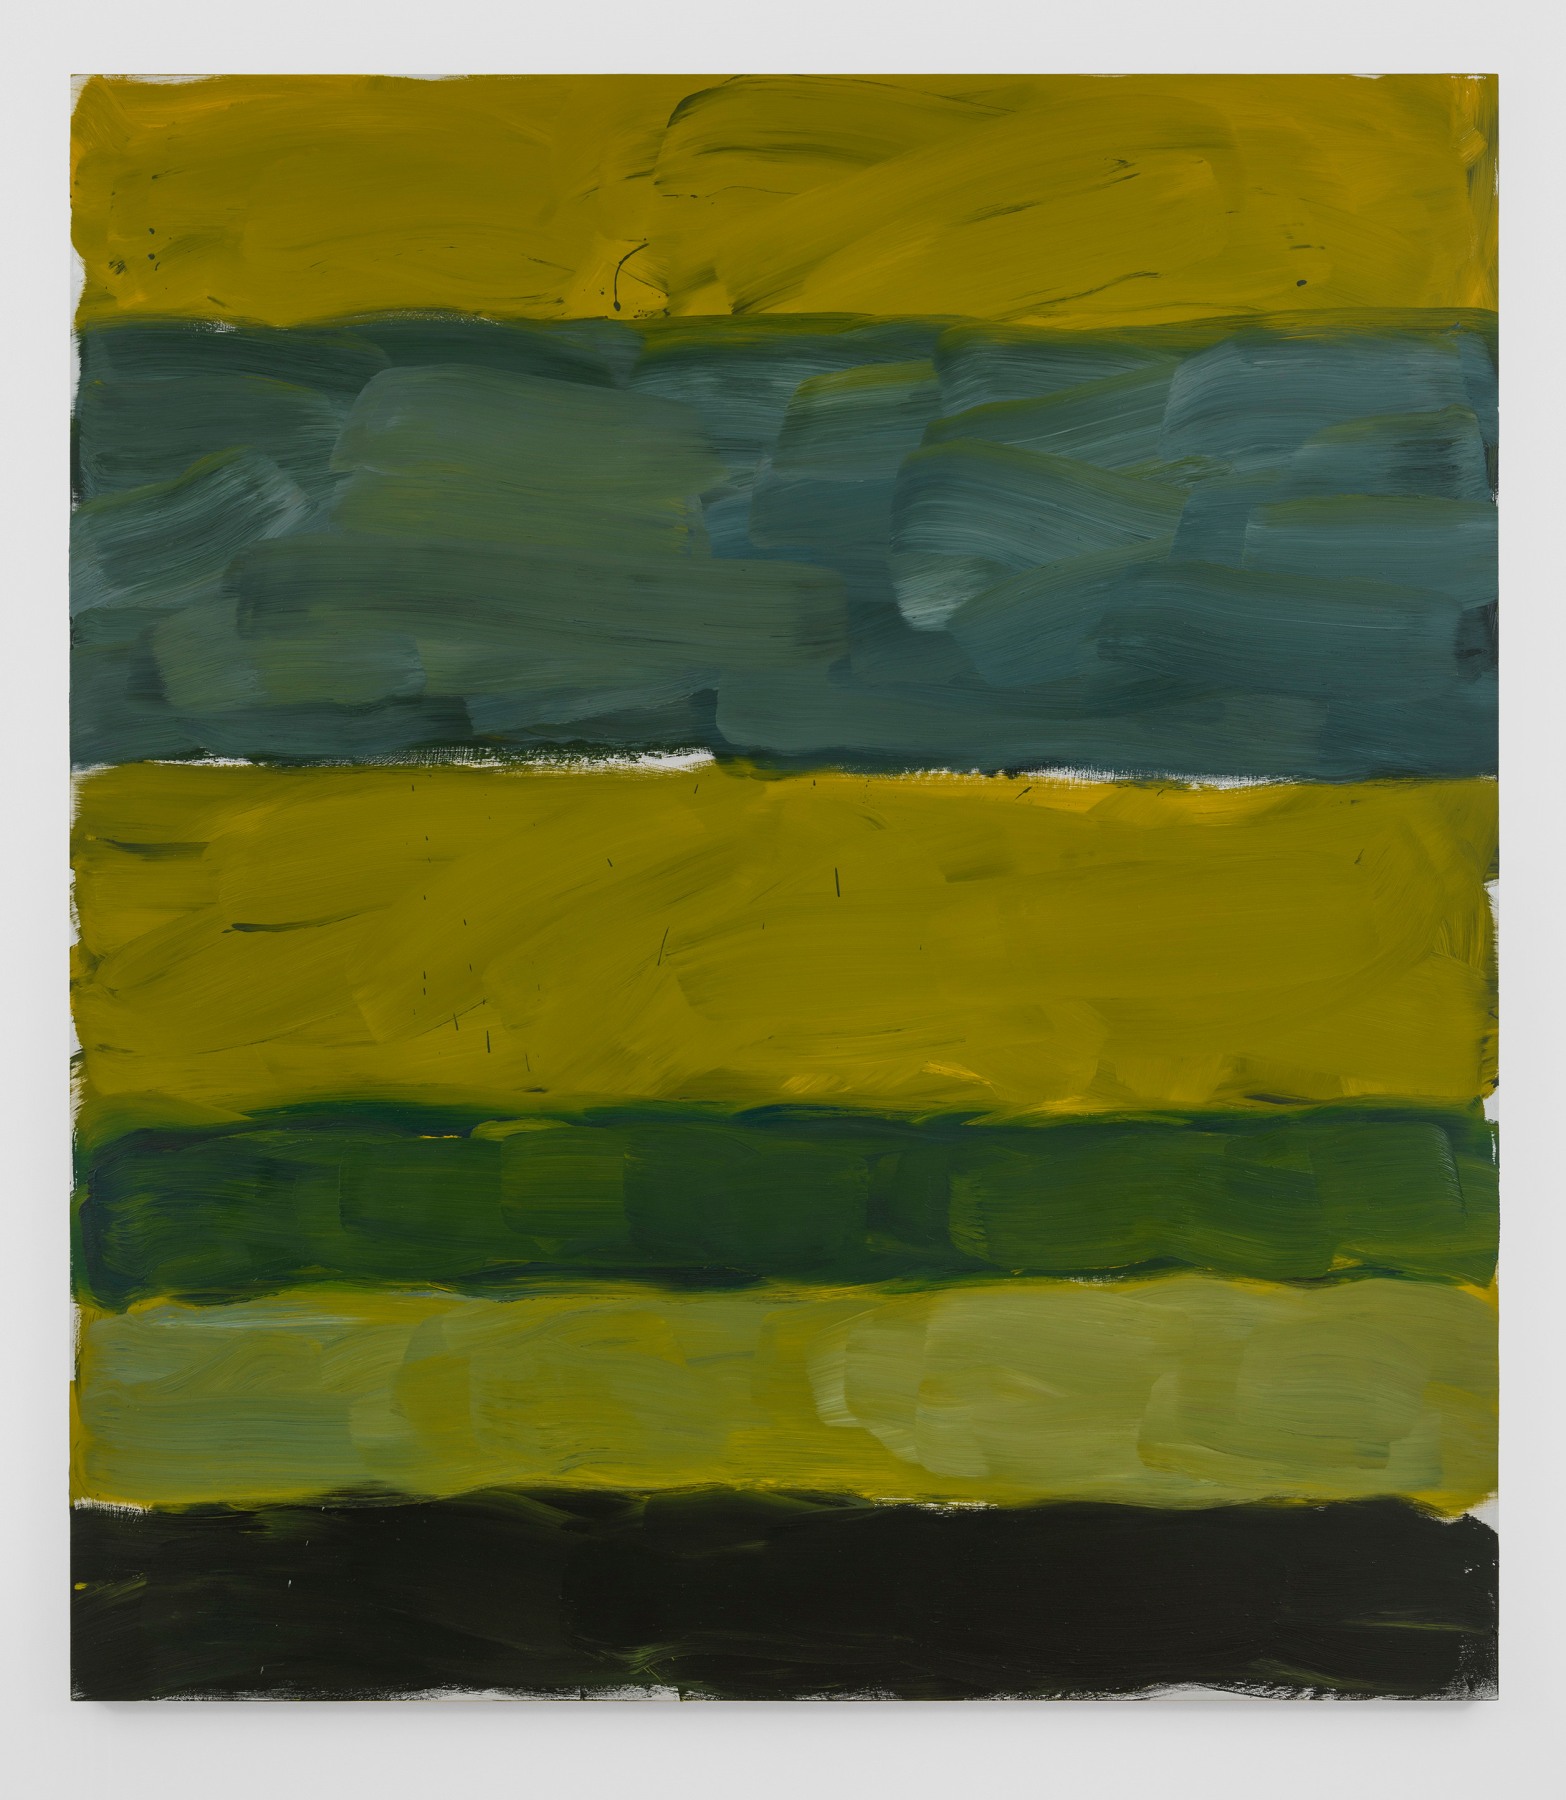 Sean Scully - Images